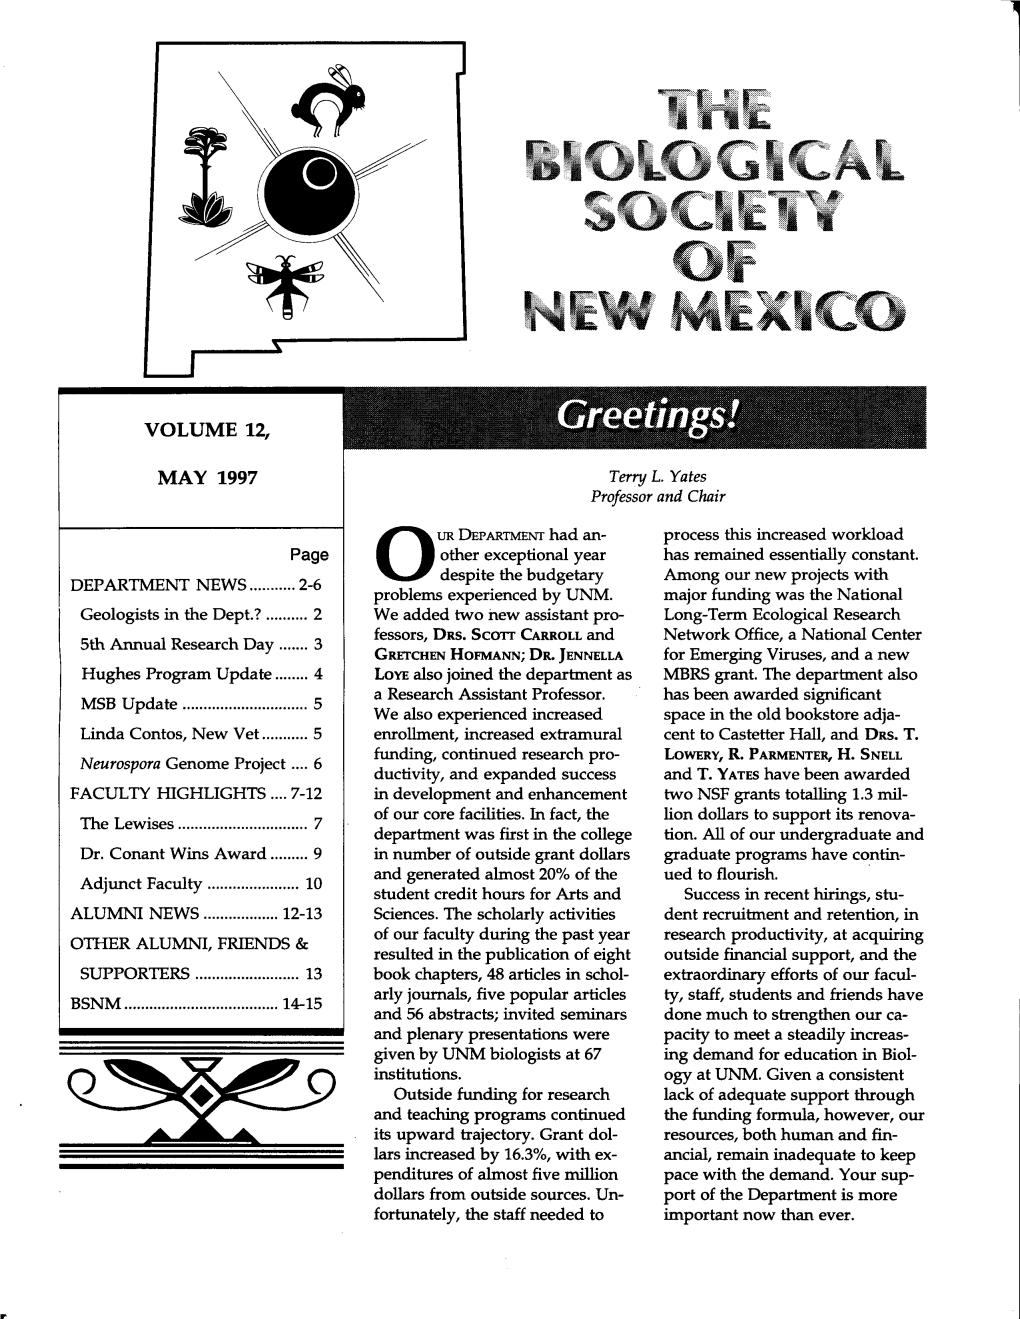 May 1997 the BIOLOGICAL SOCIETY of NEW MEXICO